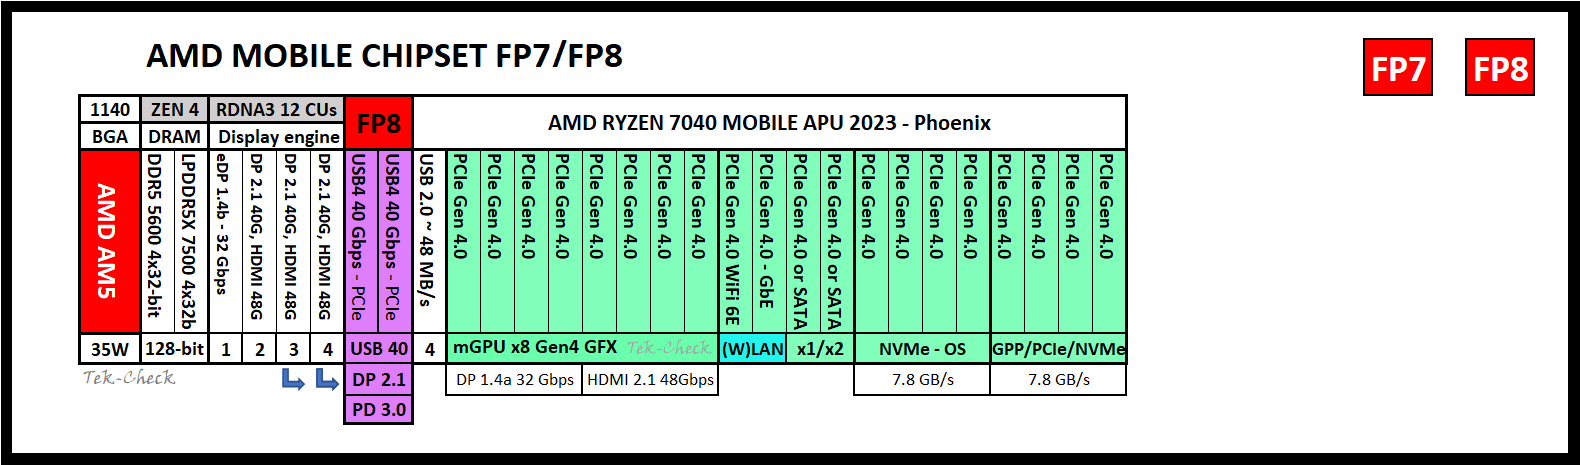 AMD MOBILE FP8 7040.png